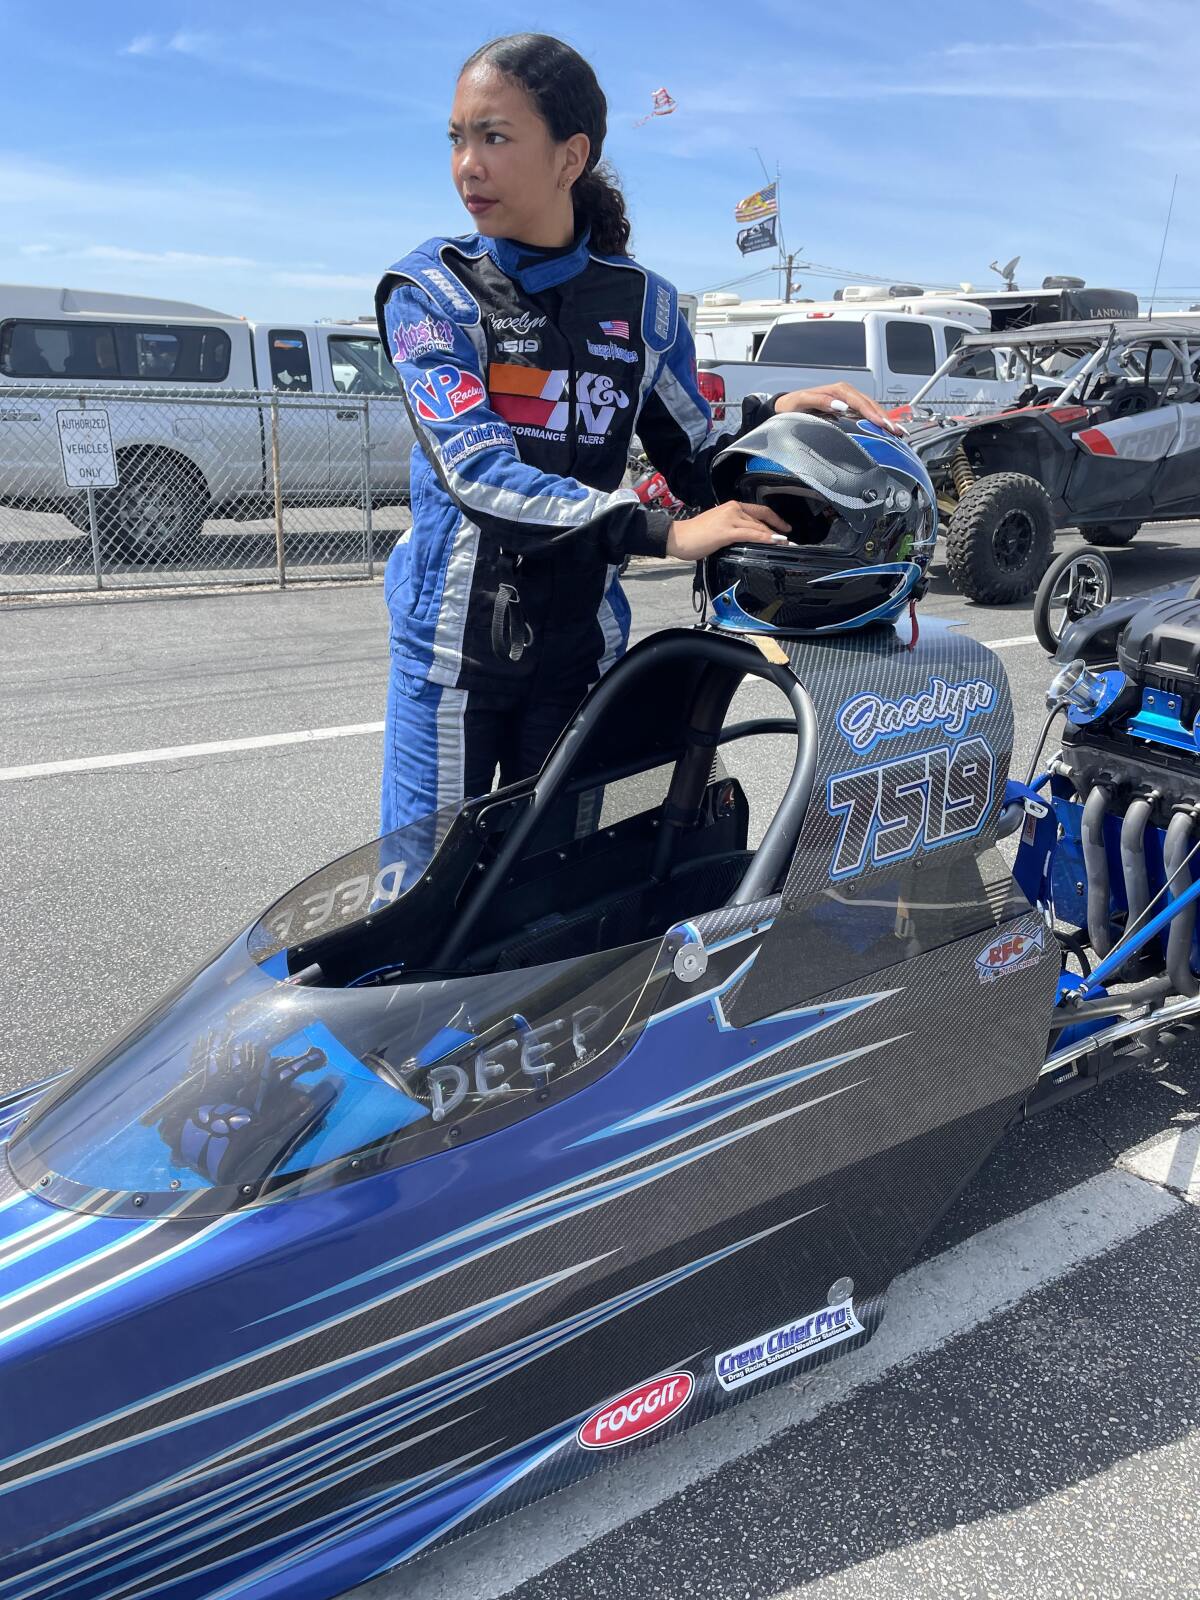 Jacelyn Gonzaga, 15, in racing suit and holding her helmet, stands beside her car at drag racing strip